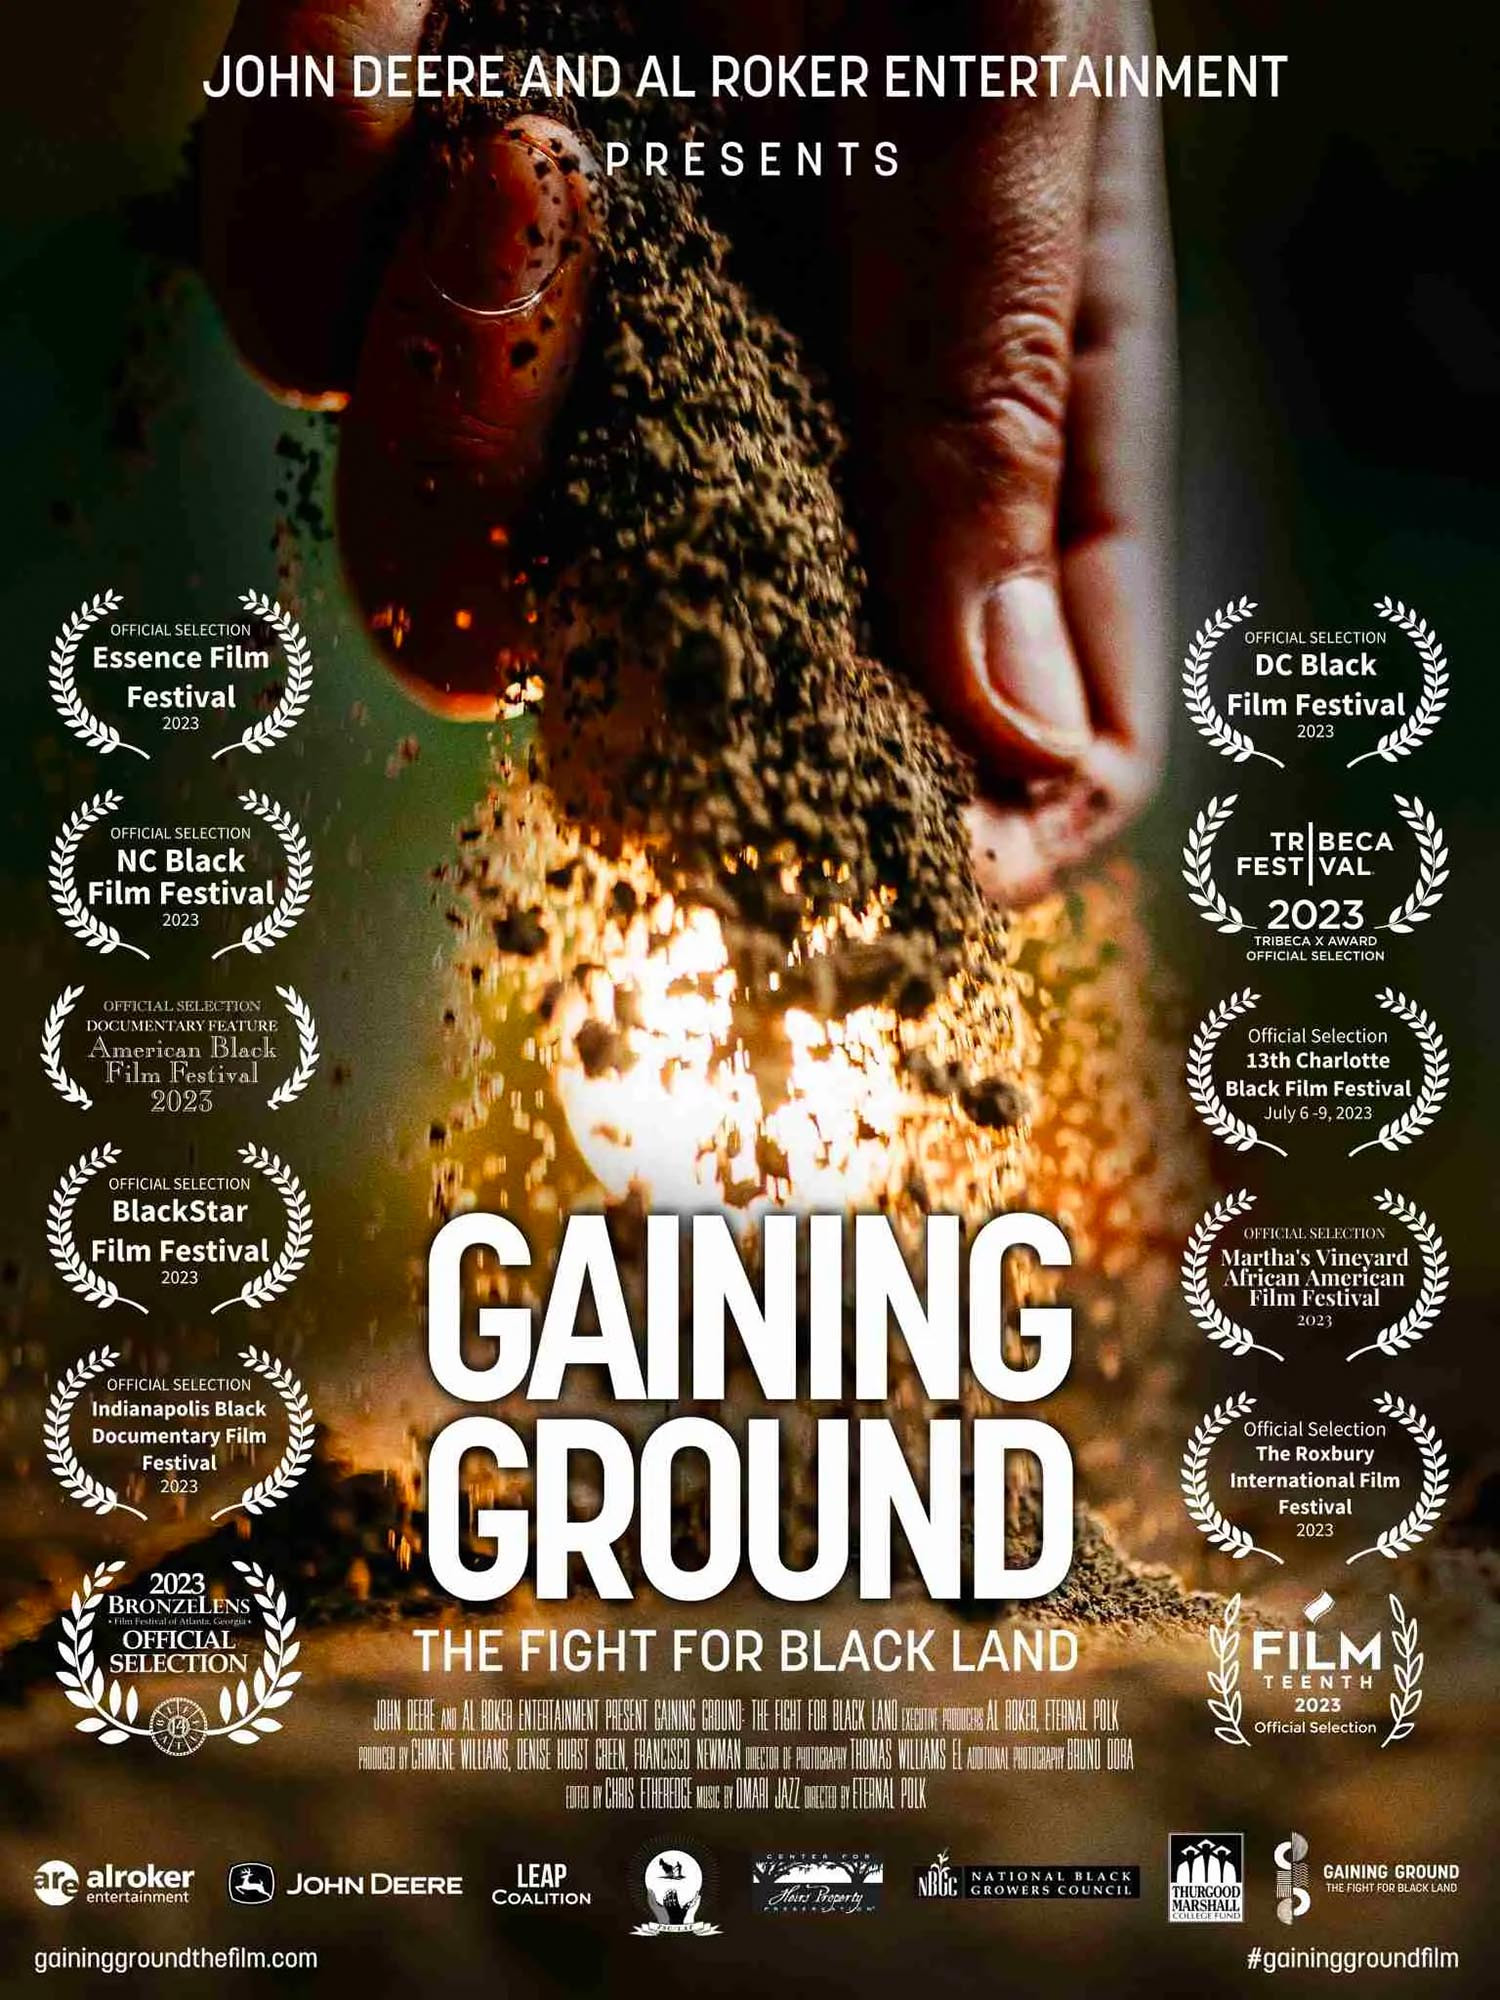 Harvesting Hope: The Fight for Fair Land in ‘Gaining Ground’ – An Exclusive Interview with Al Roker